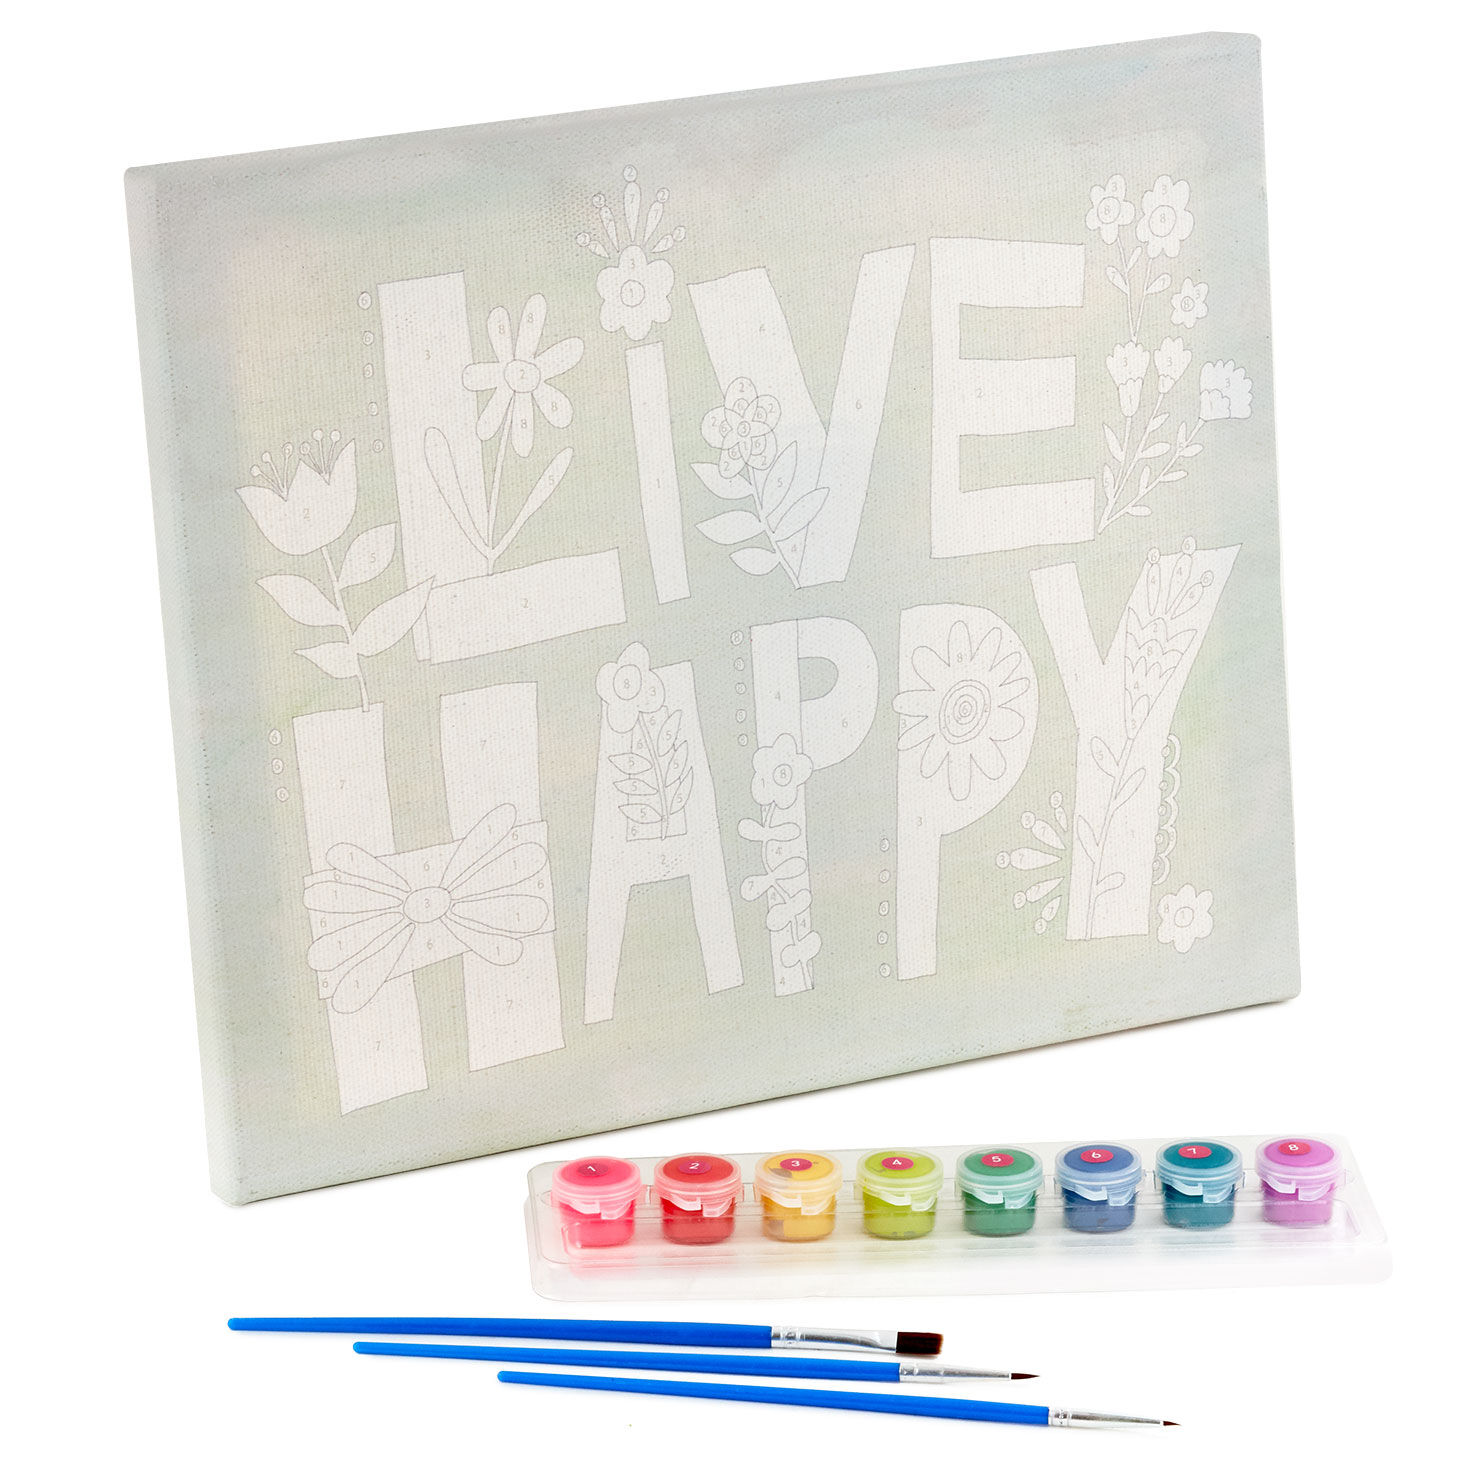 Natural Life Live Happy Paint By Number Wrapped Canvas Kit, 12x10 for only USD 29.99 | Hallmark